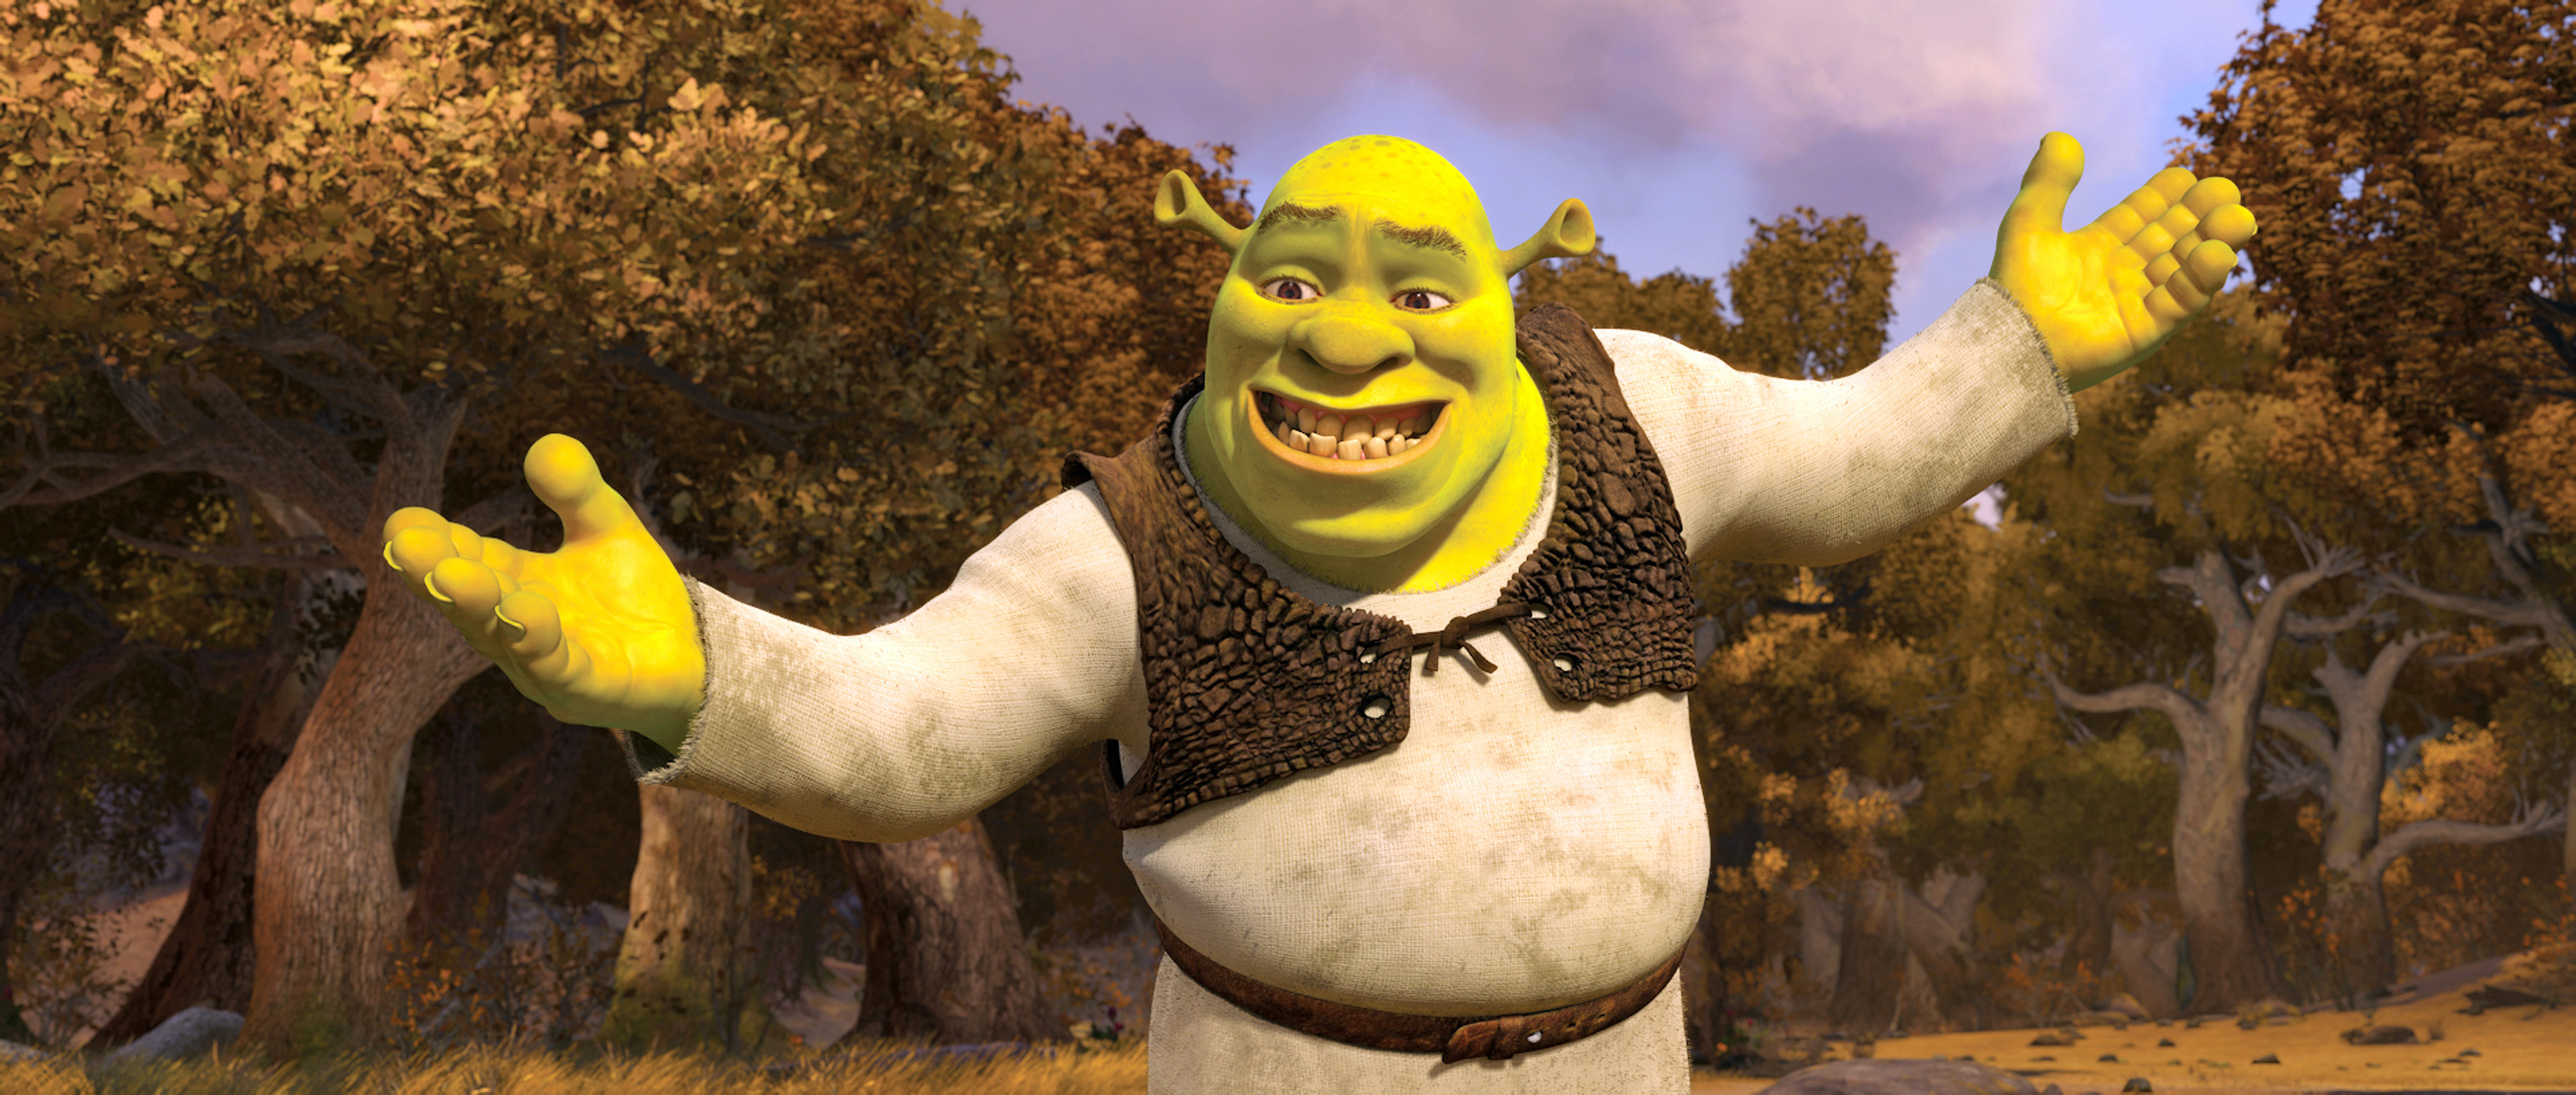 Green ogre Shrek has his arms outstretched. He&#x27;s in a white shirt and leather vest.